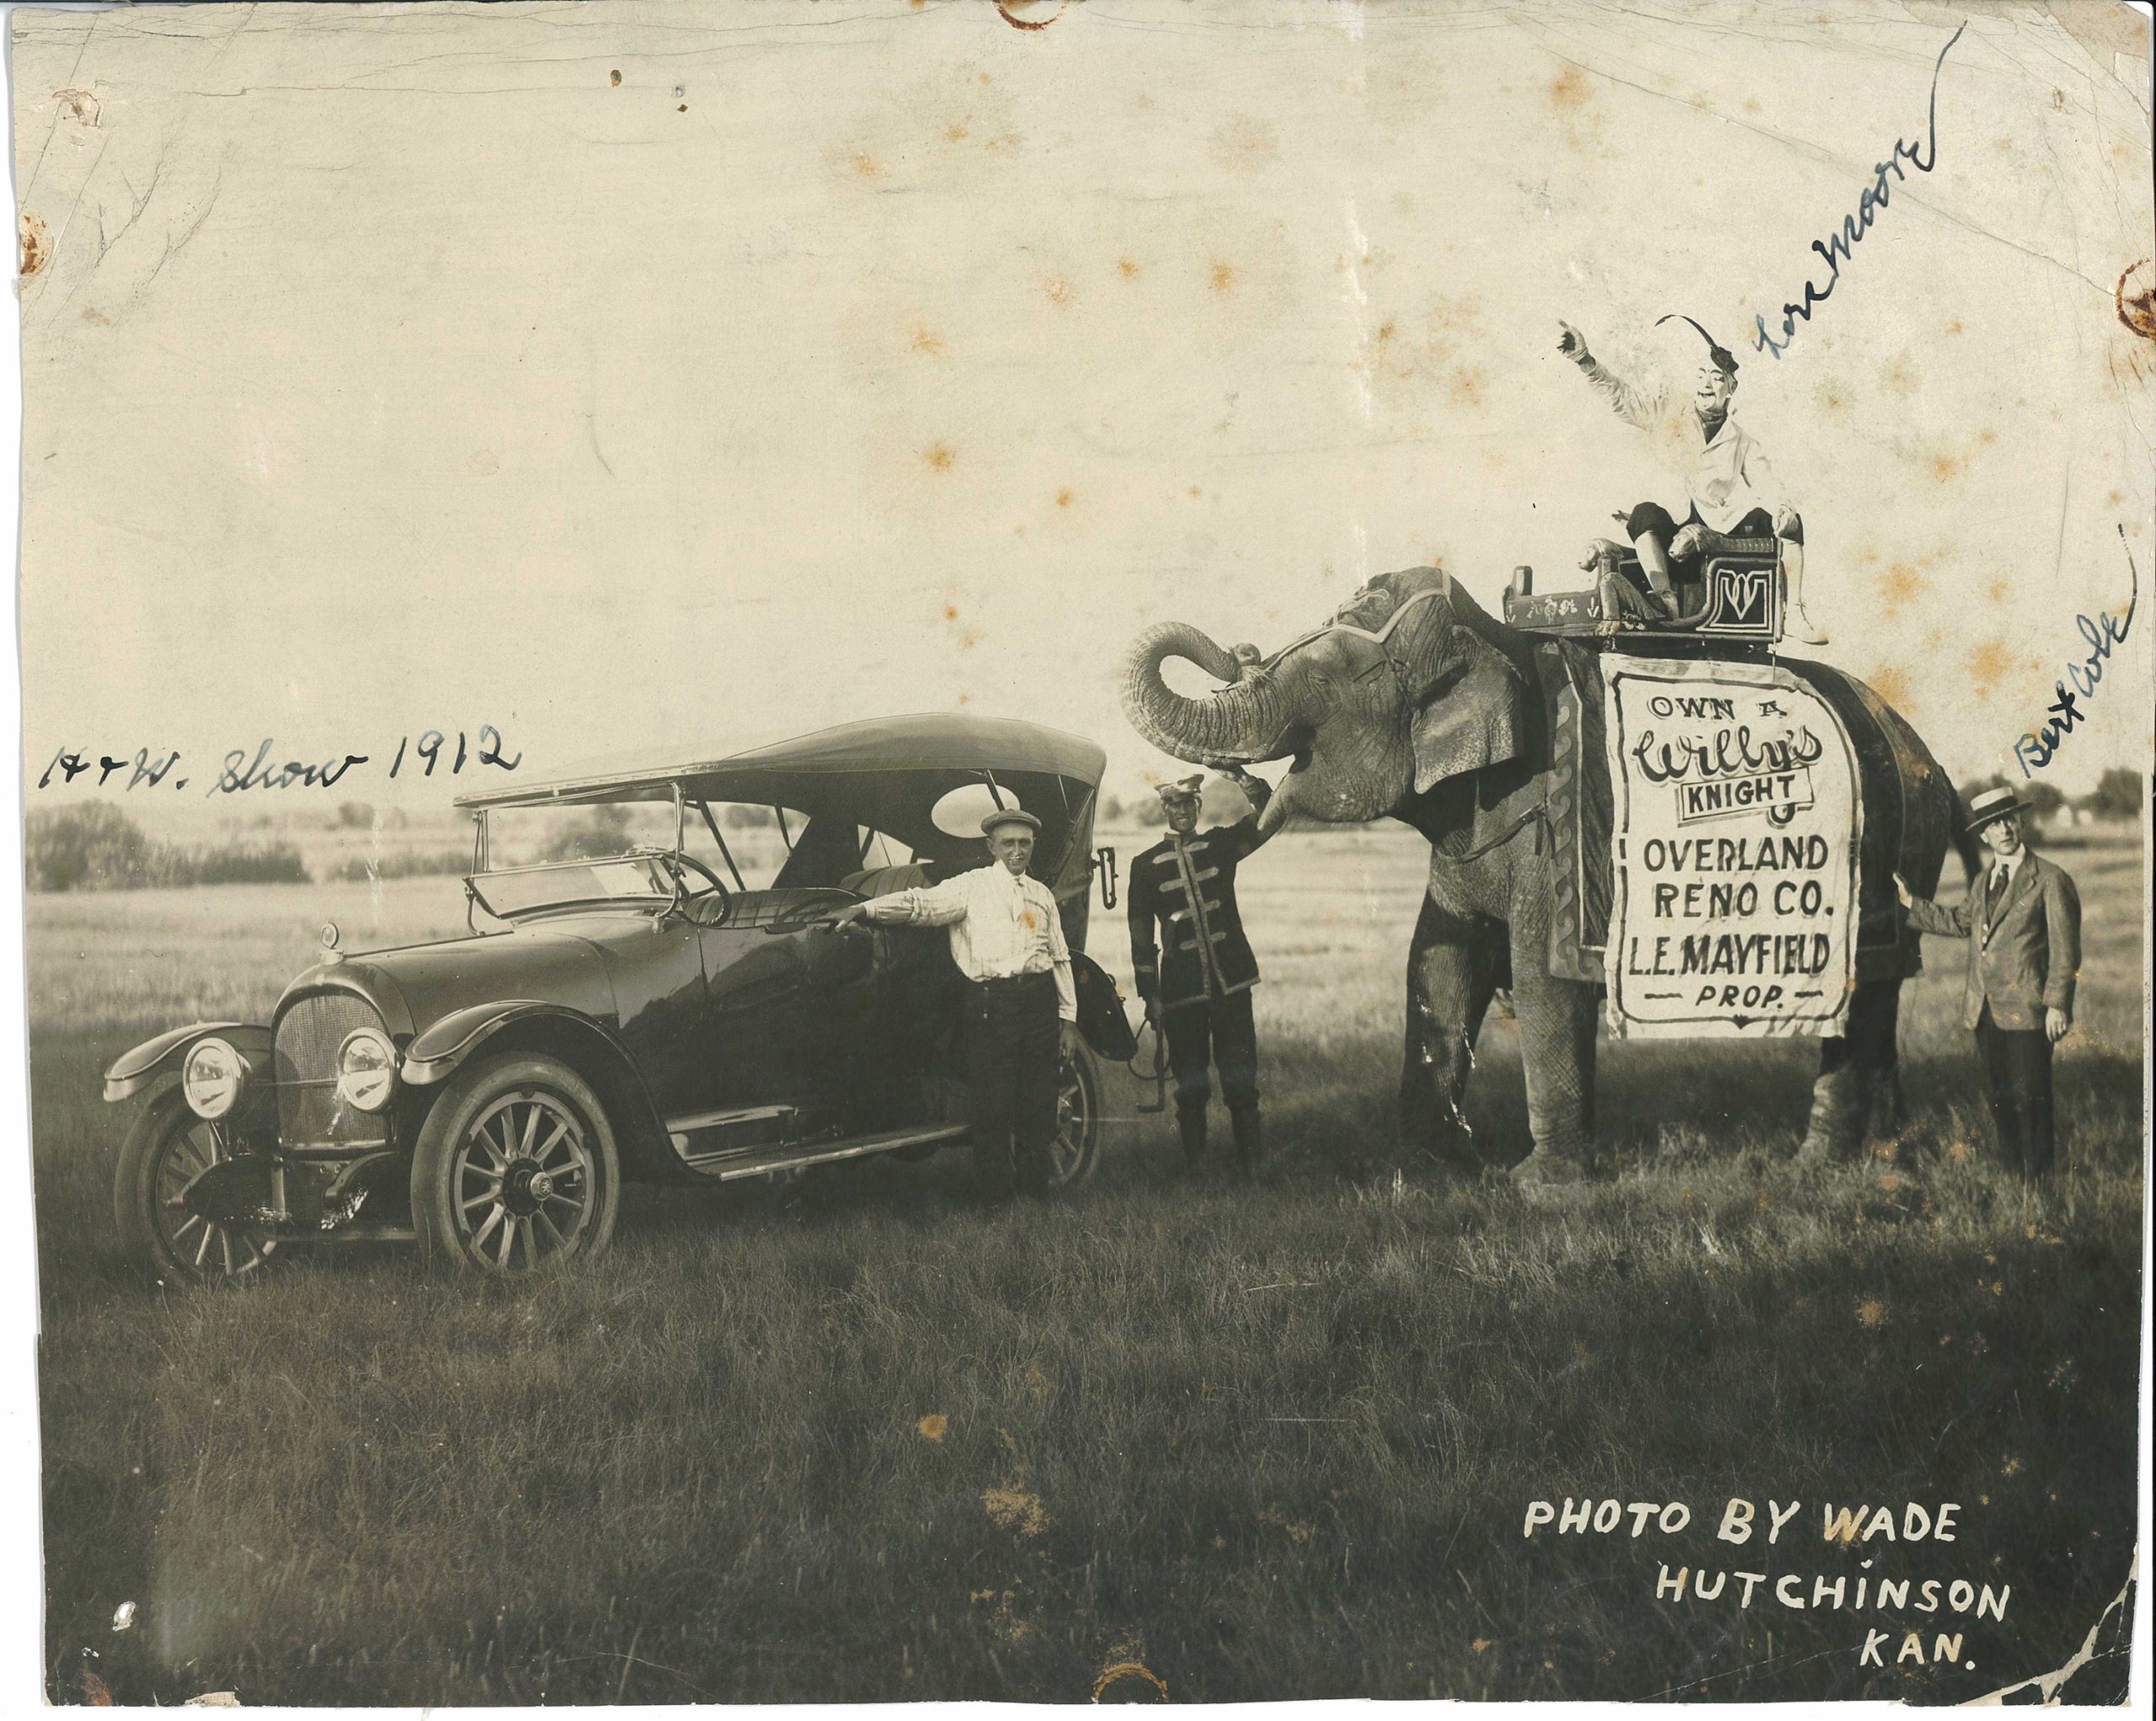 Black and white photograph of an elephant in a grassy field standing next to a black car. The elephant wears a white sign reading "Own a Willy's Knight." A clown in makeup and costume rides the elephant and several other men stand around the elephant. 